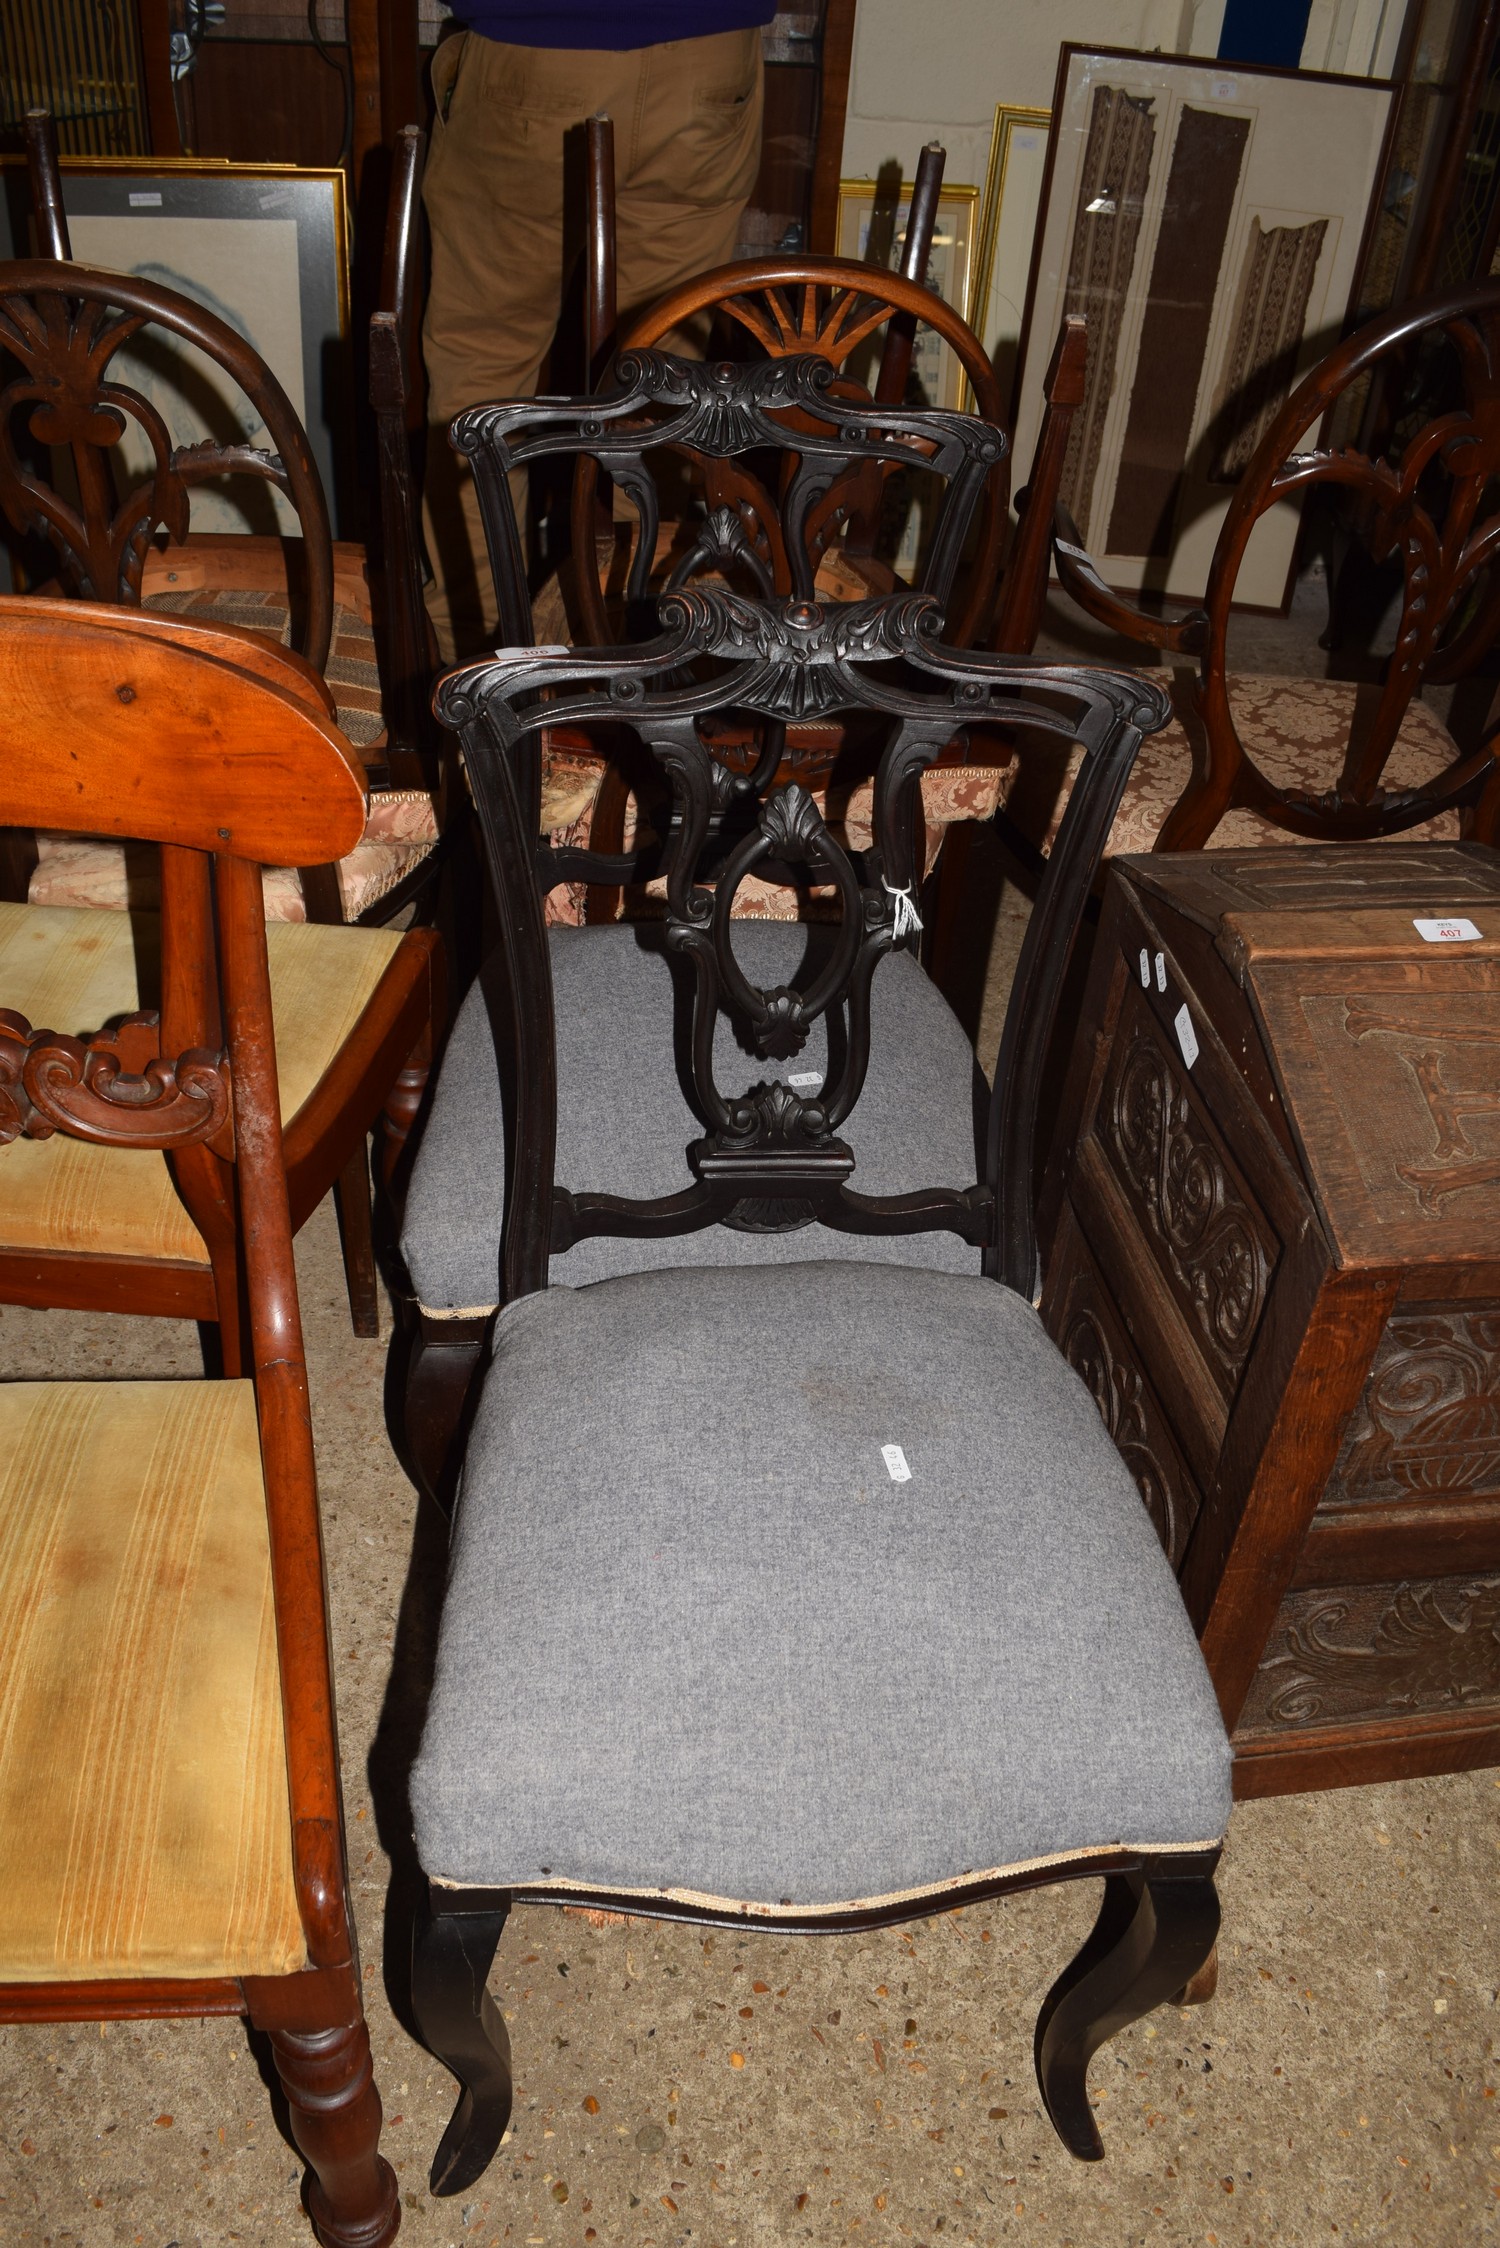 PAIR OF LATE VICTORIAN SIDE CHAIRS WITH CARVED EBONISED BACKS, BLUE UPHOLSTERED SEATS AND CABRIOLE